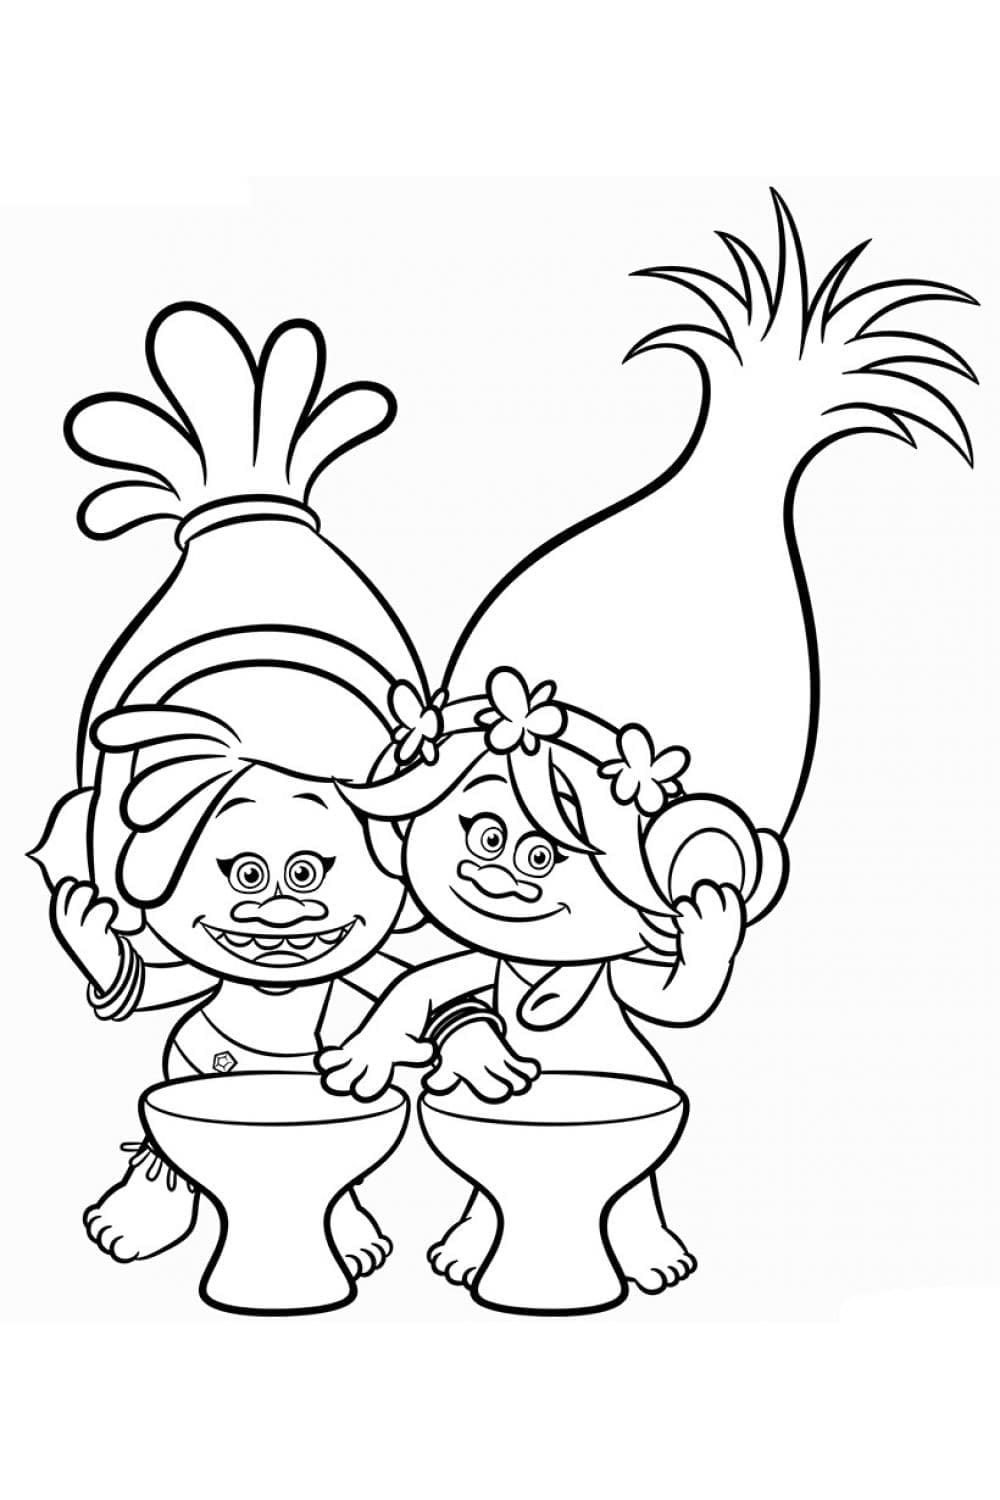 DJ Suki and Poppy from Trolls coloring page - Download, Print or Color ...